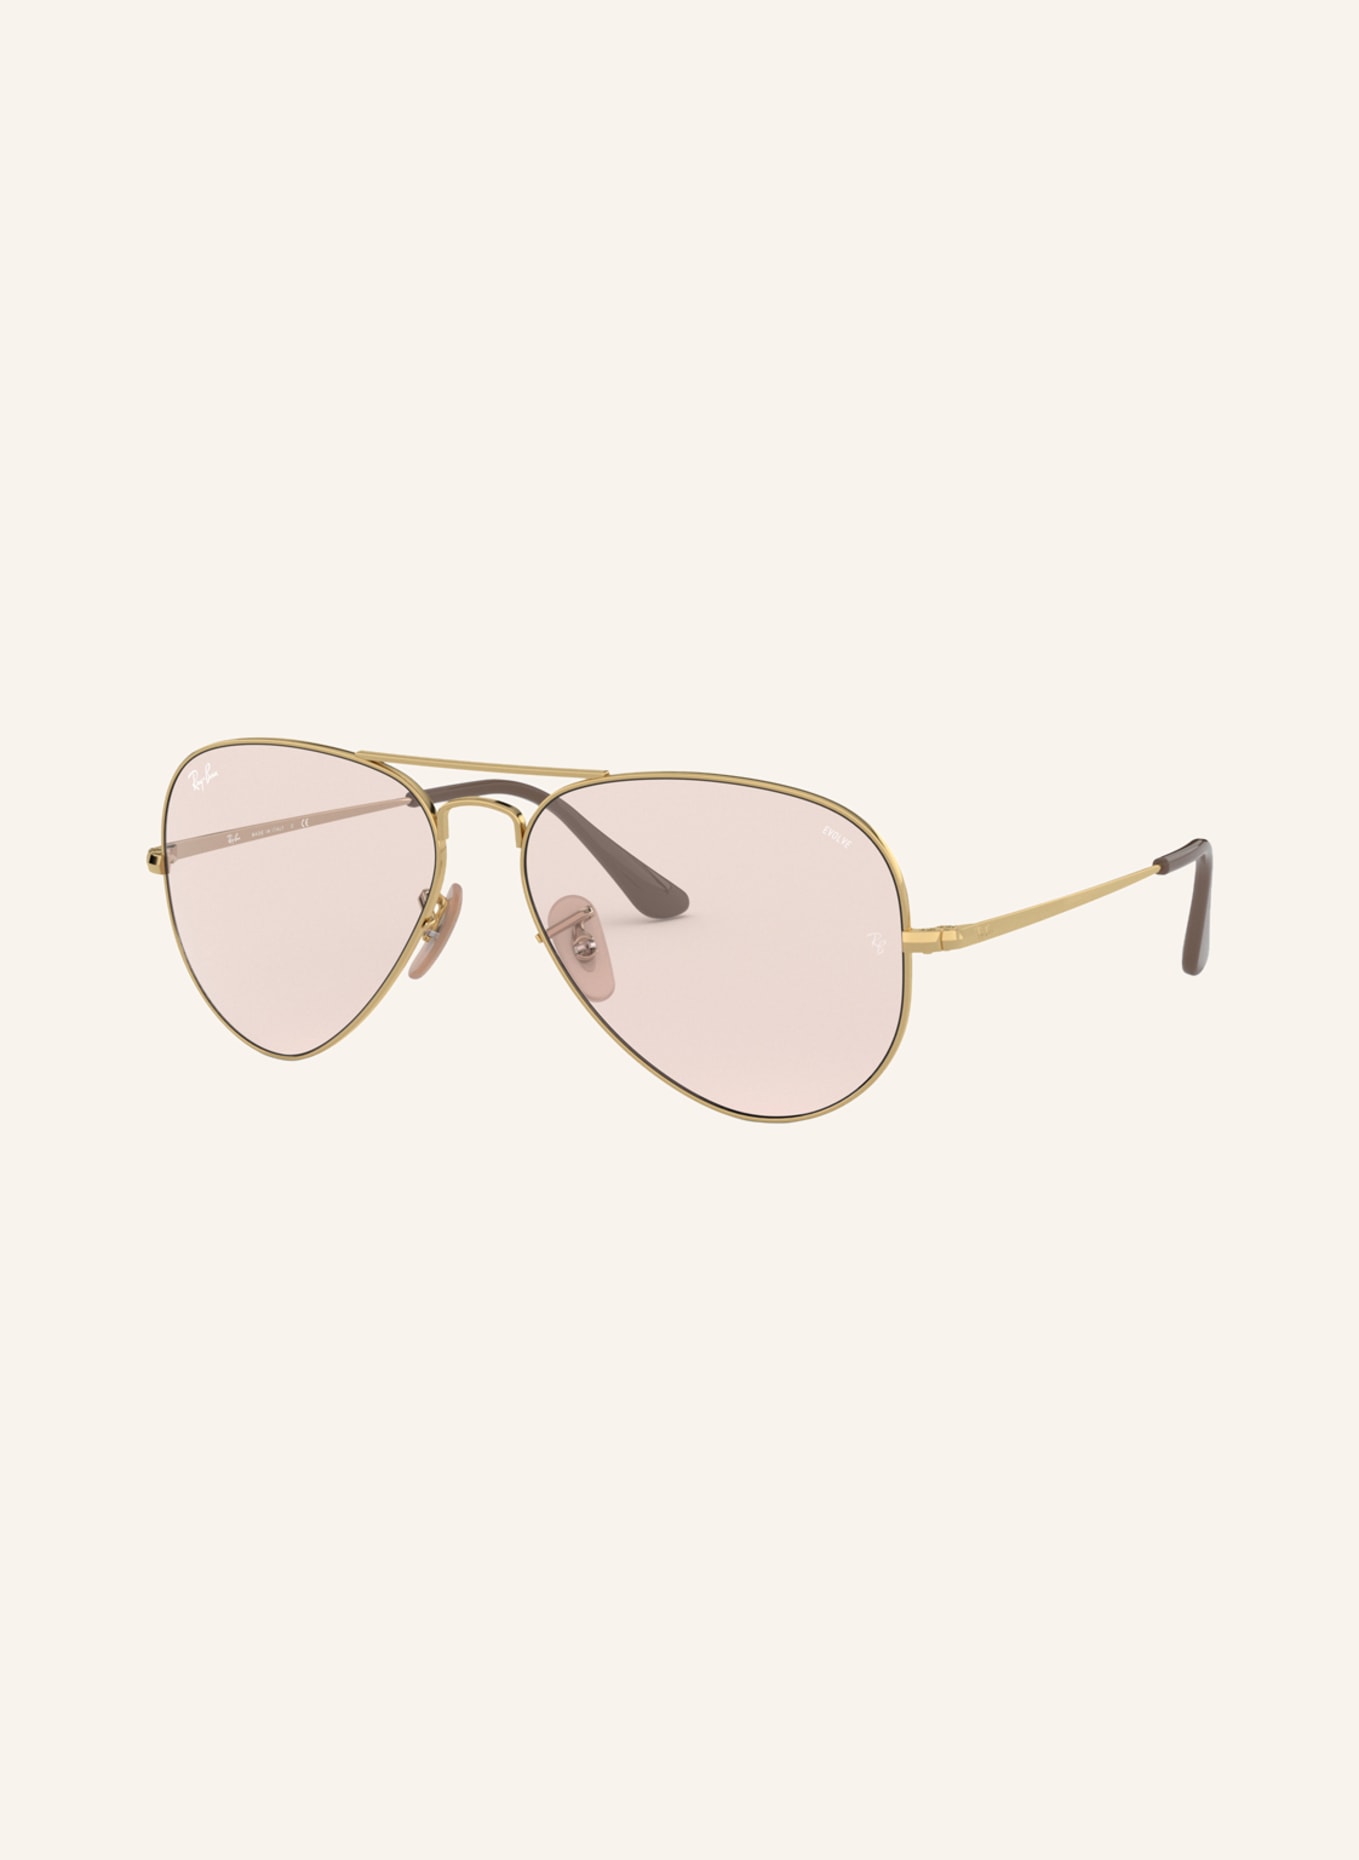 Ray-Ban Sunglasses RB3689 , Color: 001/T5 - GOLD/ LIGHT PINK (Image 1)